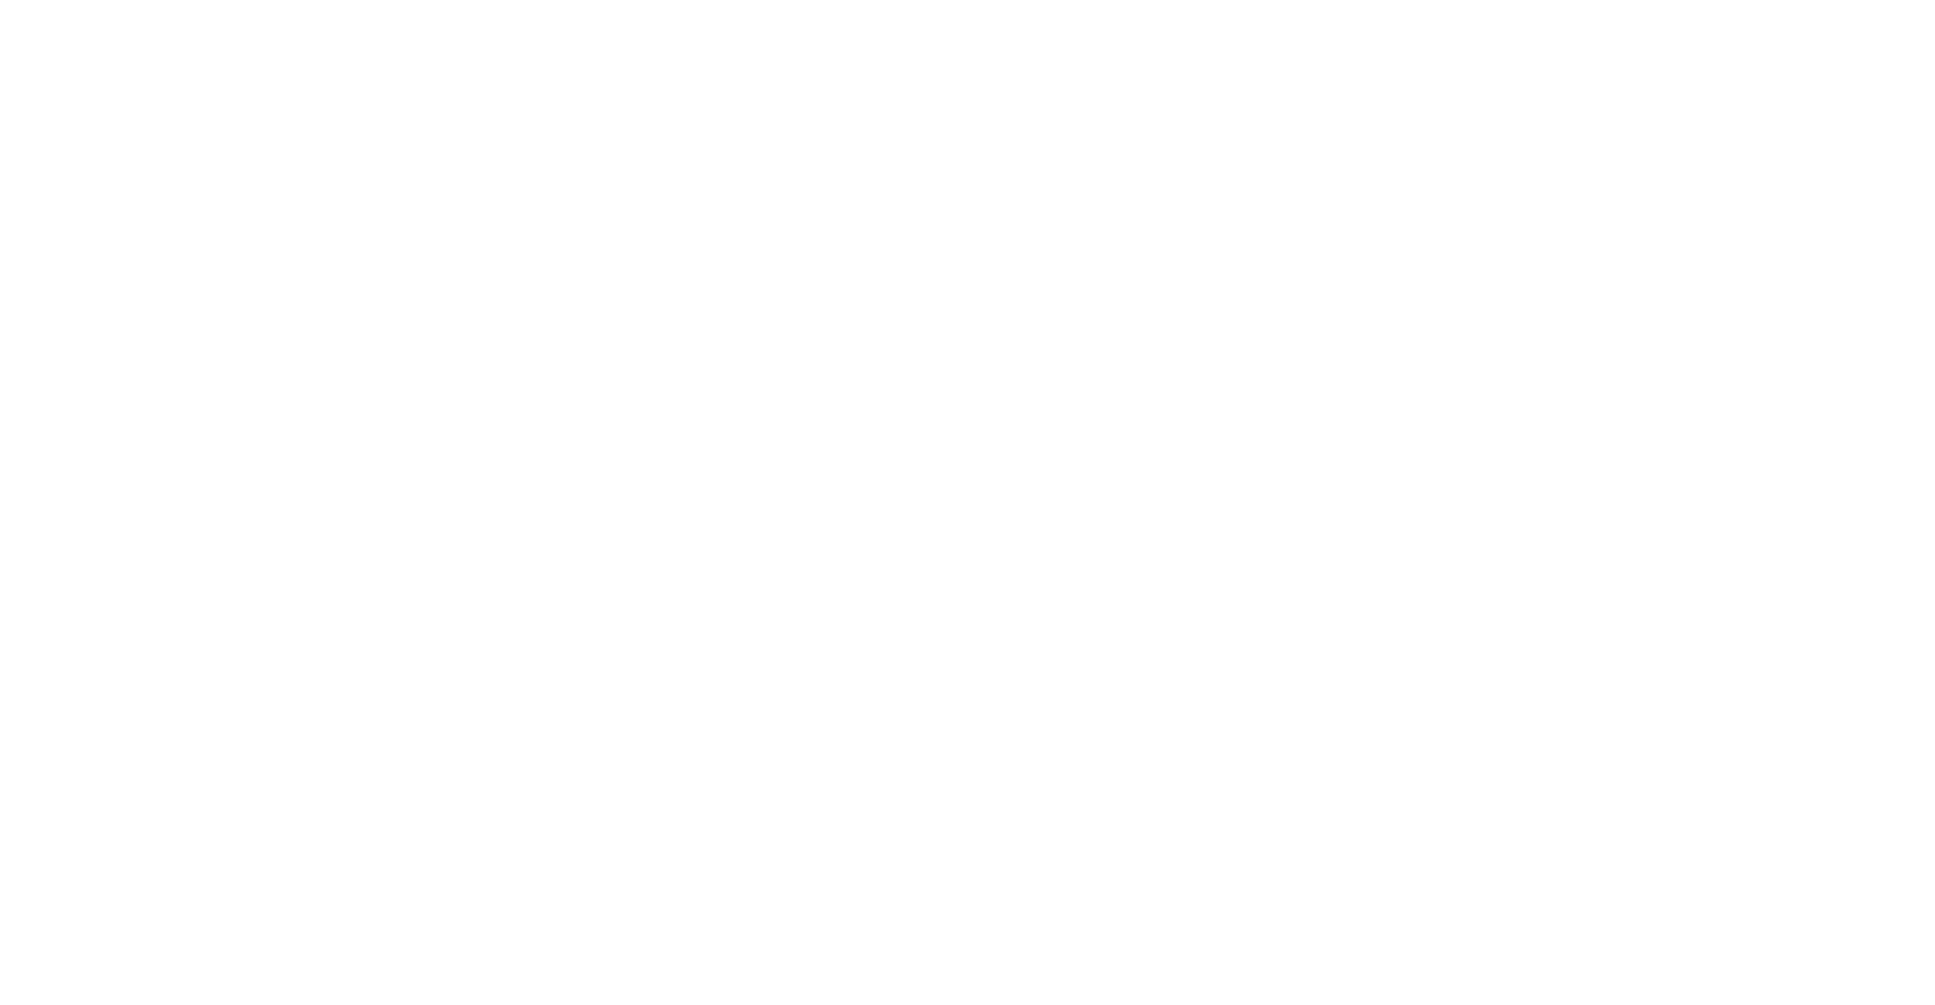 FRONTIER GROUP LOGO